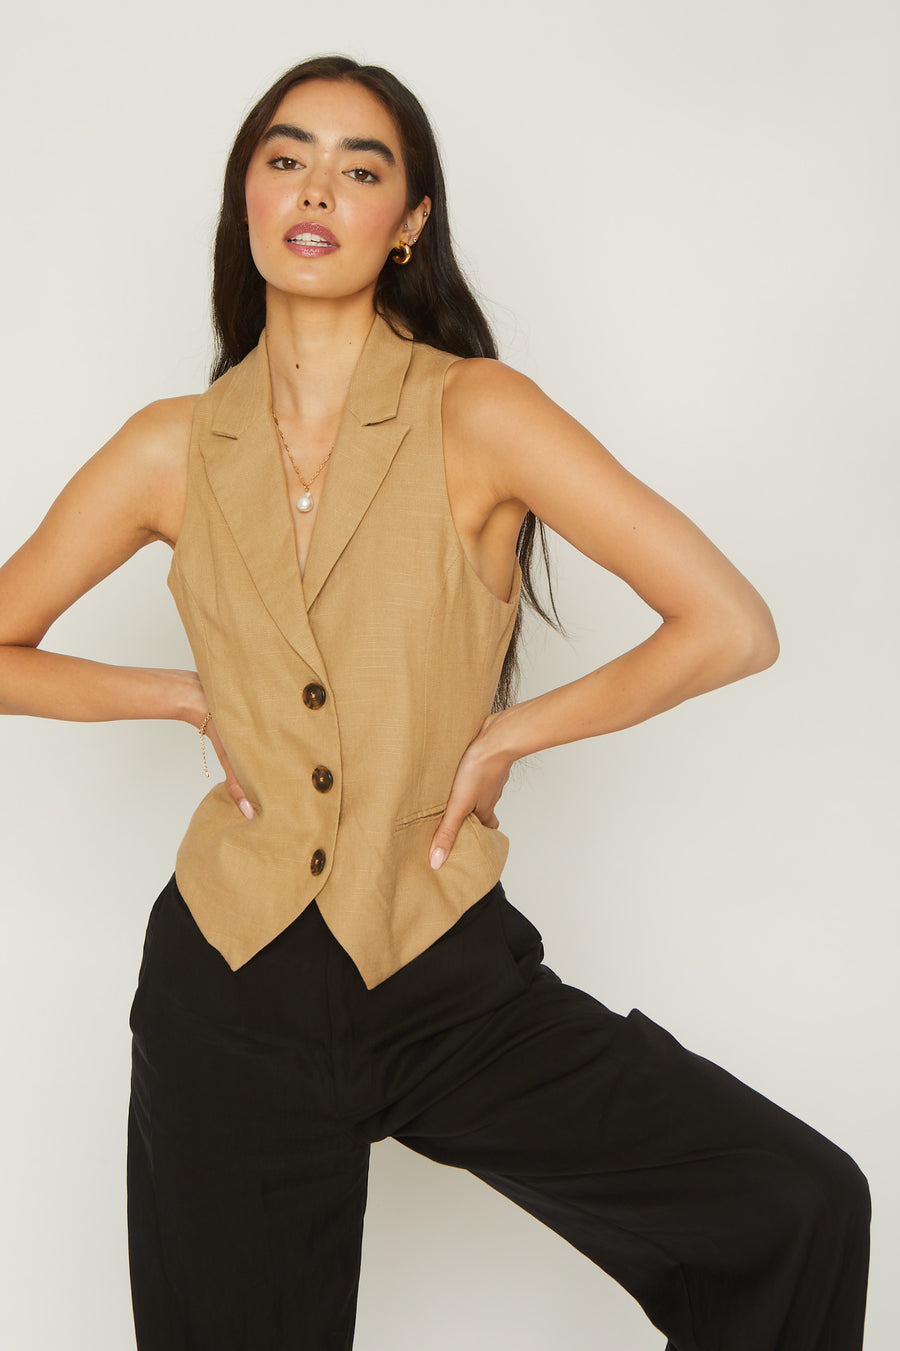 No Srcipt image - Images of 2 of 11 V Neck Linen Vest Lapel Collar Slightly Fitted Silhouette Sleeveless Latte Beige Color-Way Workwear Office Wear Professional Womens Style Fashion Neutral Staple Style